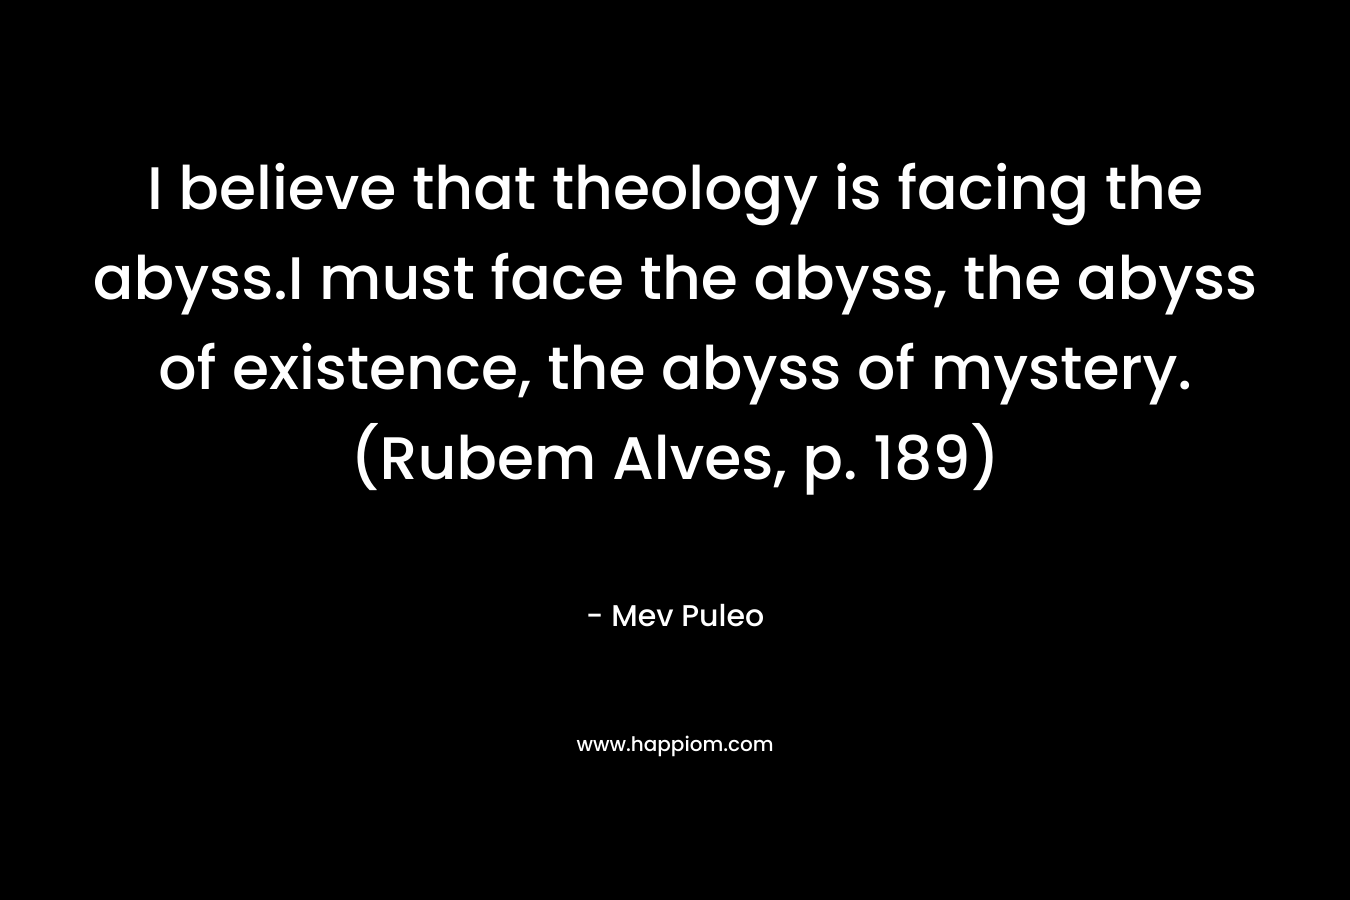 I believe that theology is facing the abyss.I must face the abyss, the abyss of existence, the abyss of mystery. (Rubem Alves, p. 189) – Mev Puleo